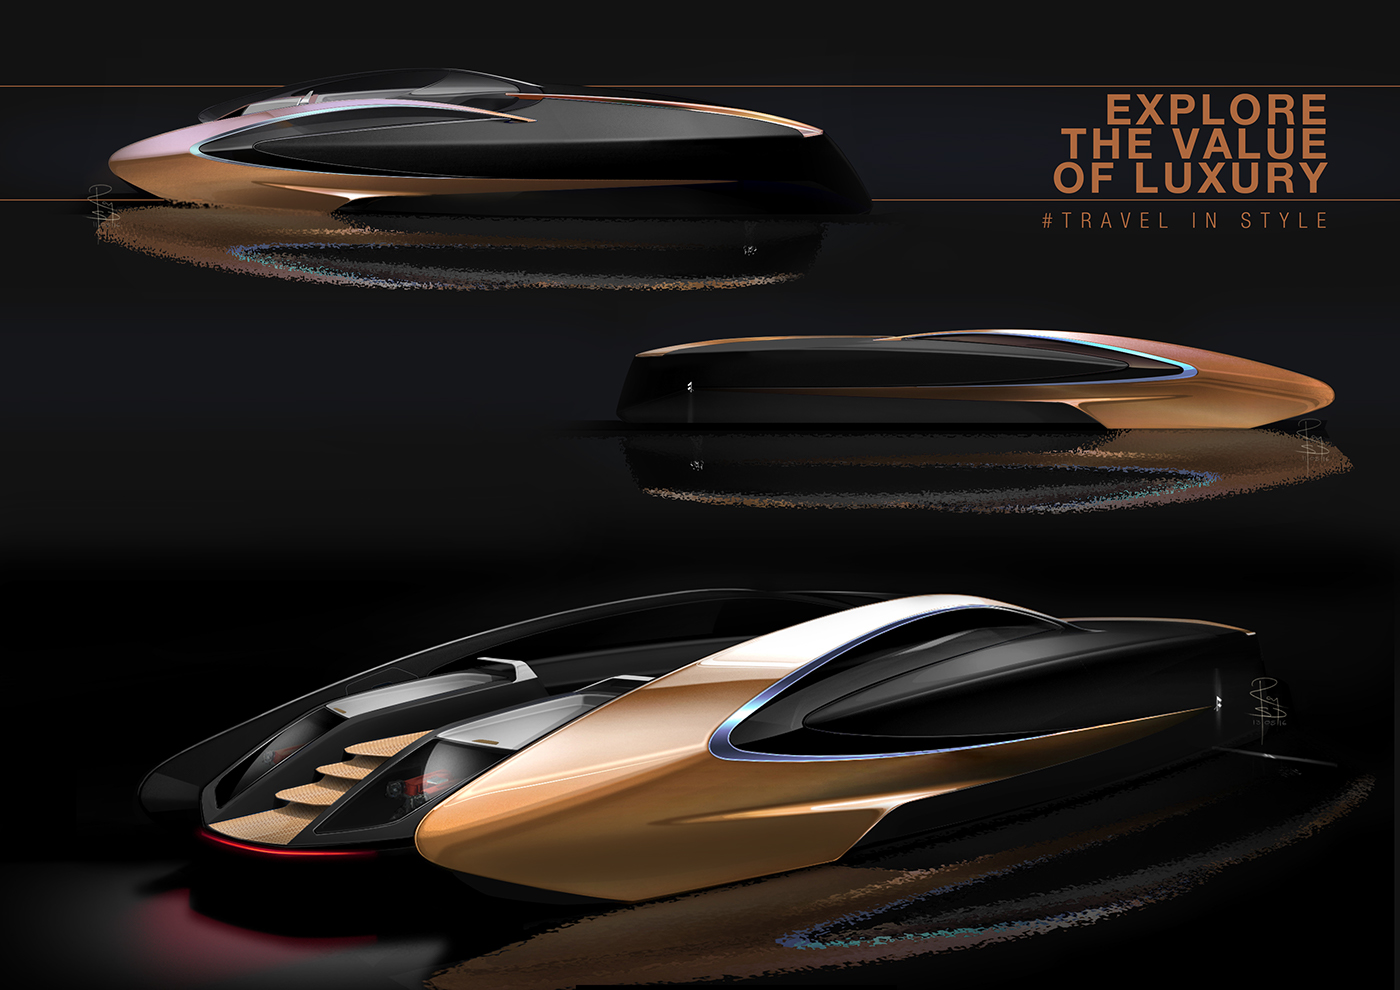 Yachts luxury transportation design concept boat Renders sketches inteior Project